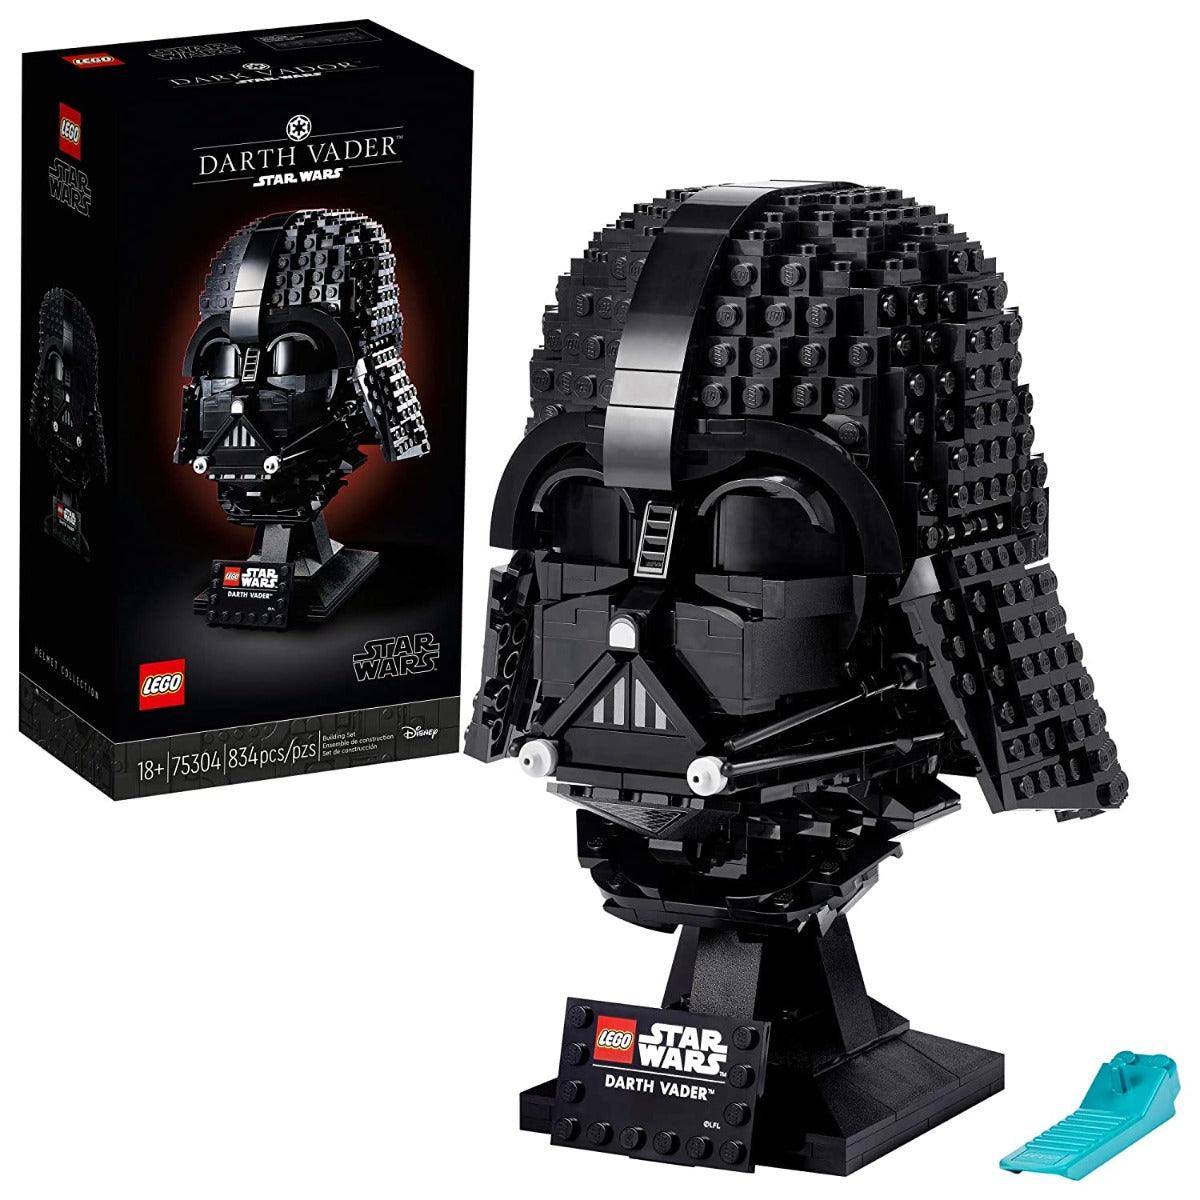 Lego Star Wars Darth Vader Helmet Collectible Building Kit For Ages 16+